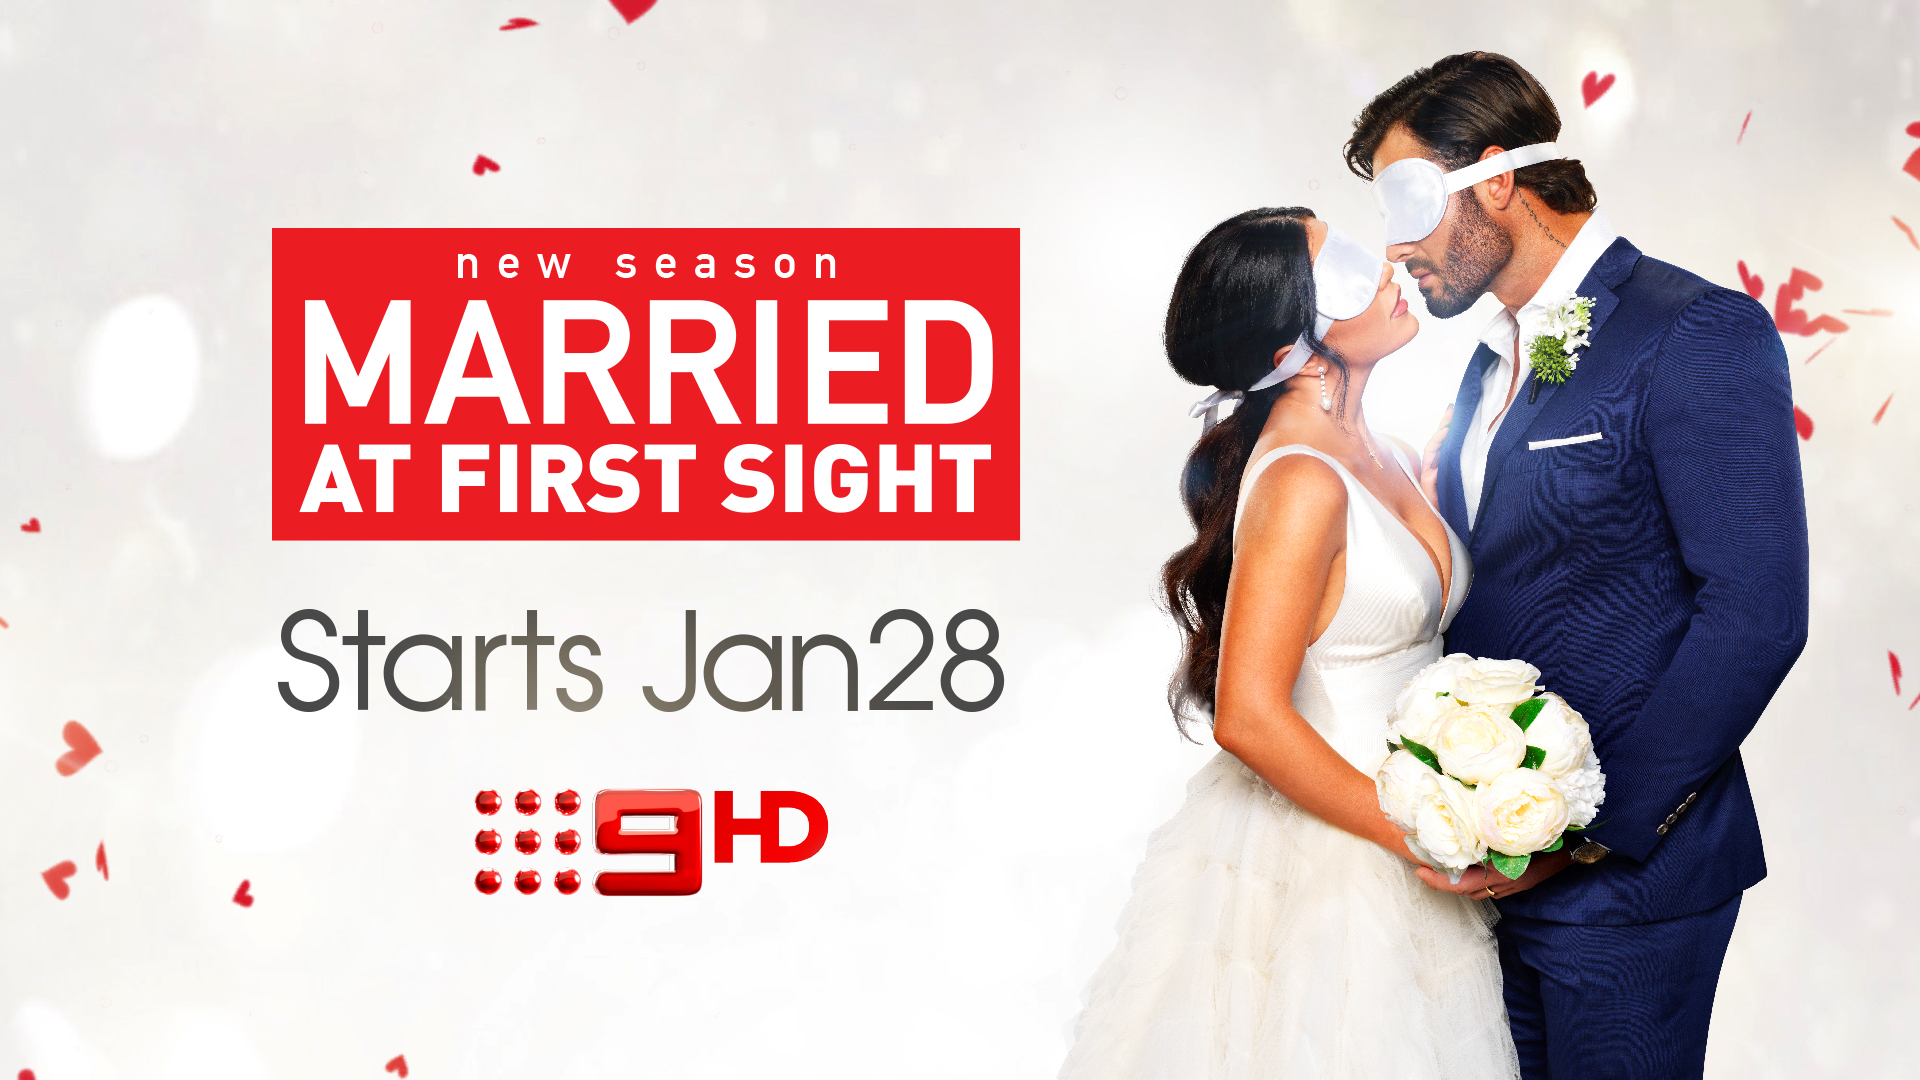 Married at First Sight Returns for its Most Explosive Series Yet Nine for Brands